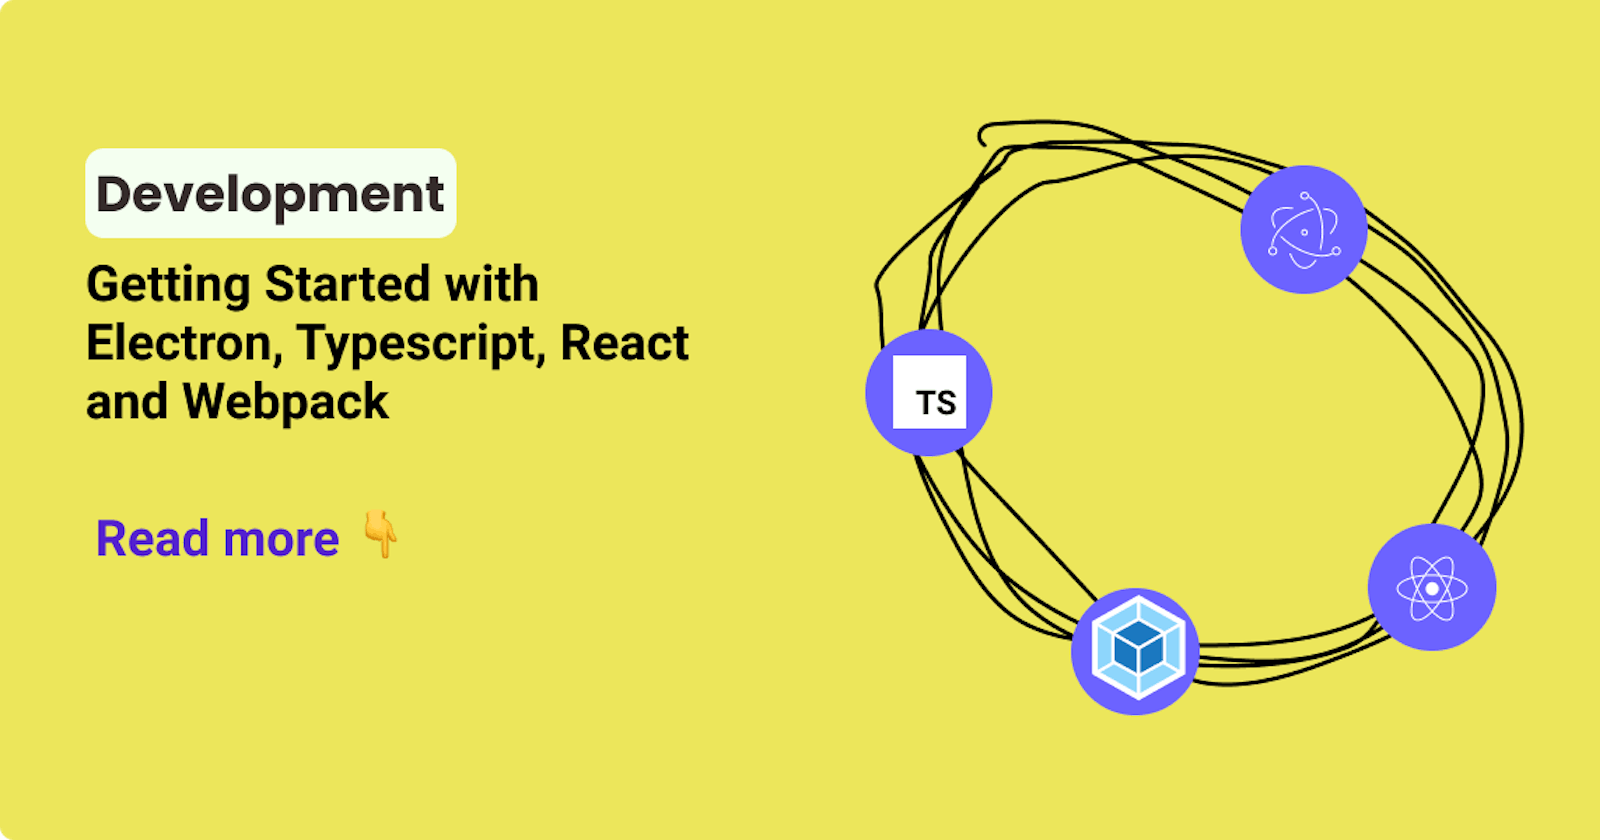 Getting Started with Electron, Typescript, React and Webpack